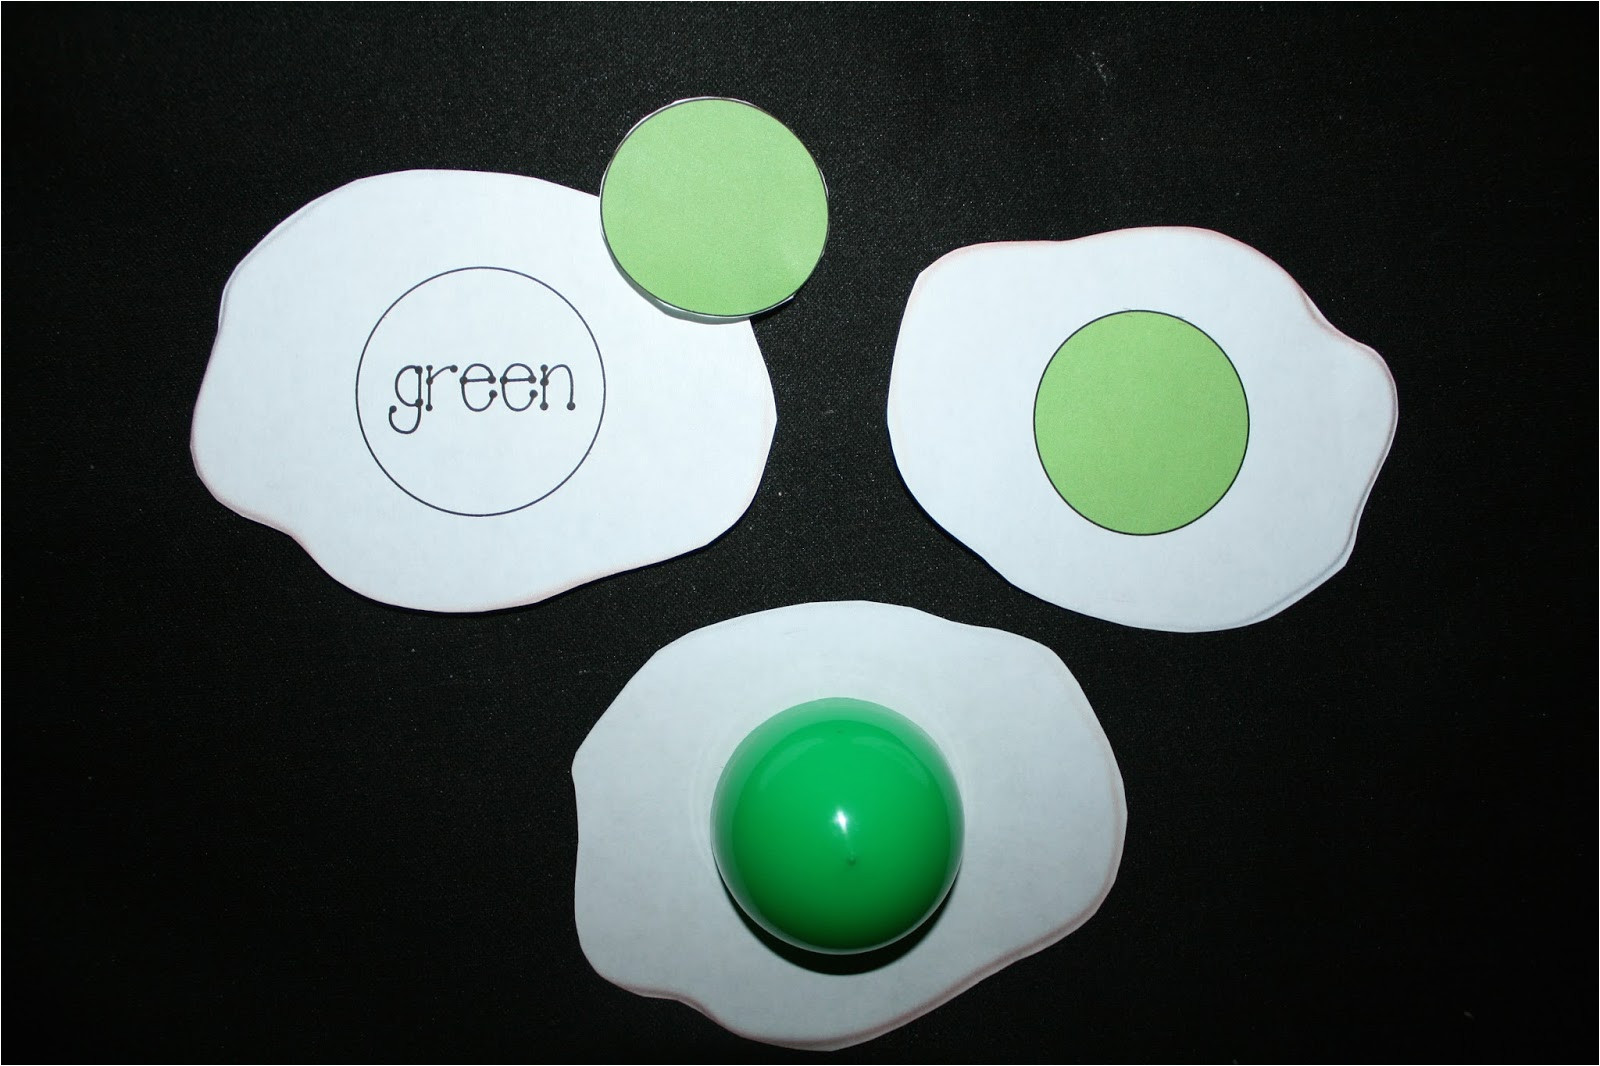 egg color matching games